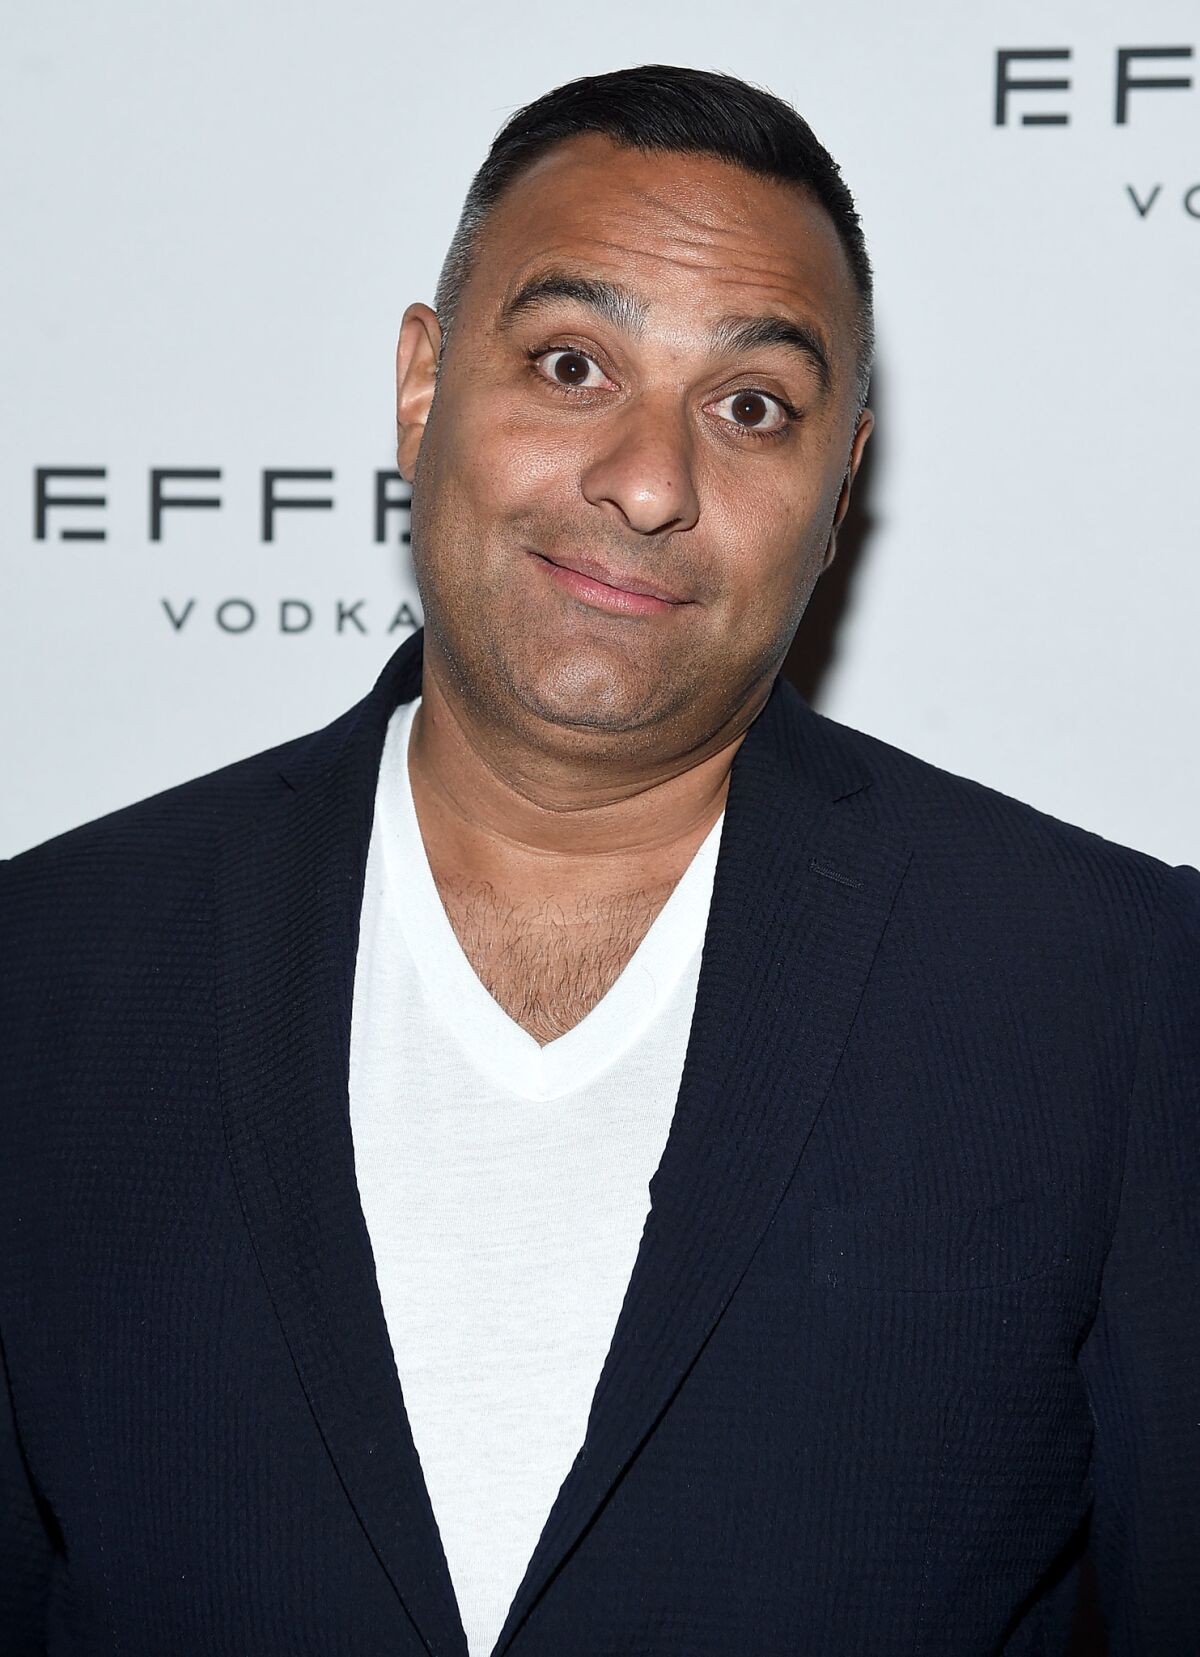 Russell Peters attends the 2017 Tribeca Film Festival After Party For The Clapper Presented By EFFEN Vodka At Avenue at Avenue on April 23, 2017 in New York City. (Photo by Jamie McCarthy/Getty Images for 2017 Tribeca Film Festival)